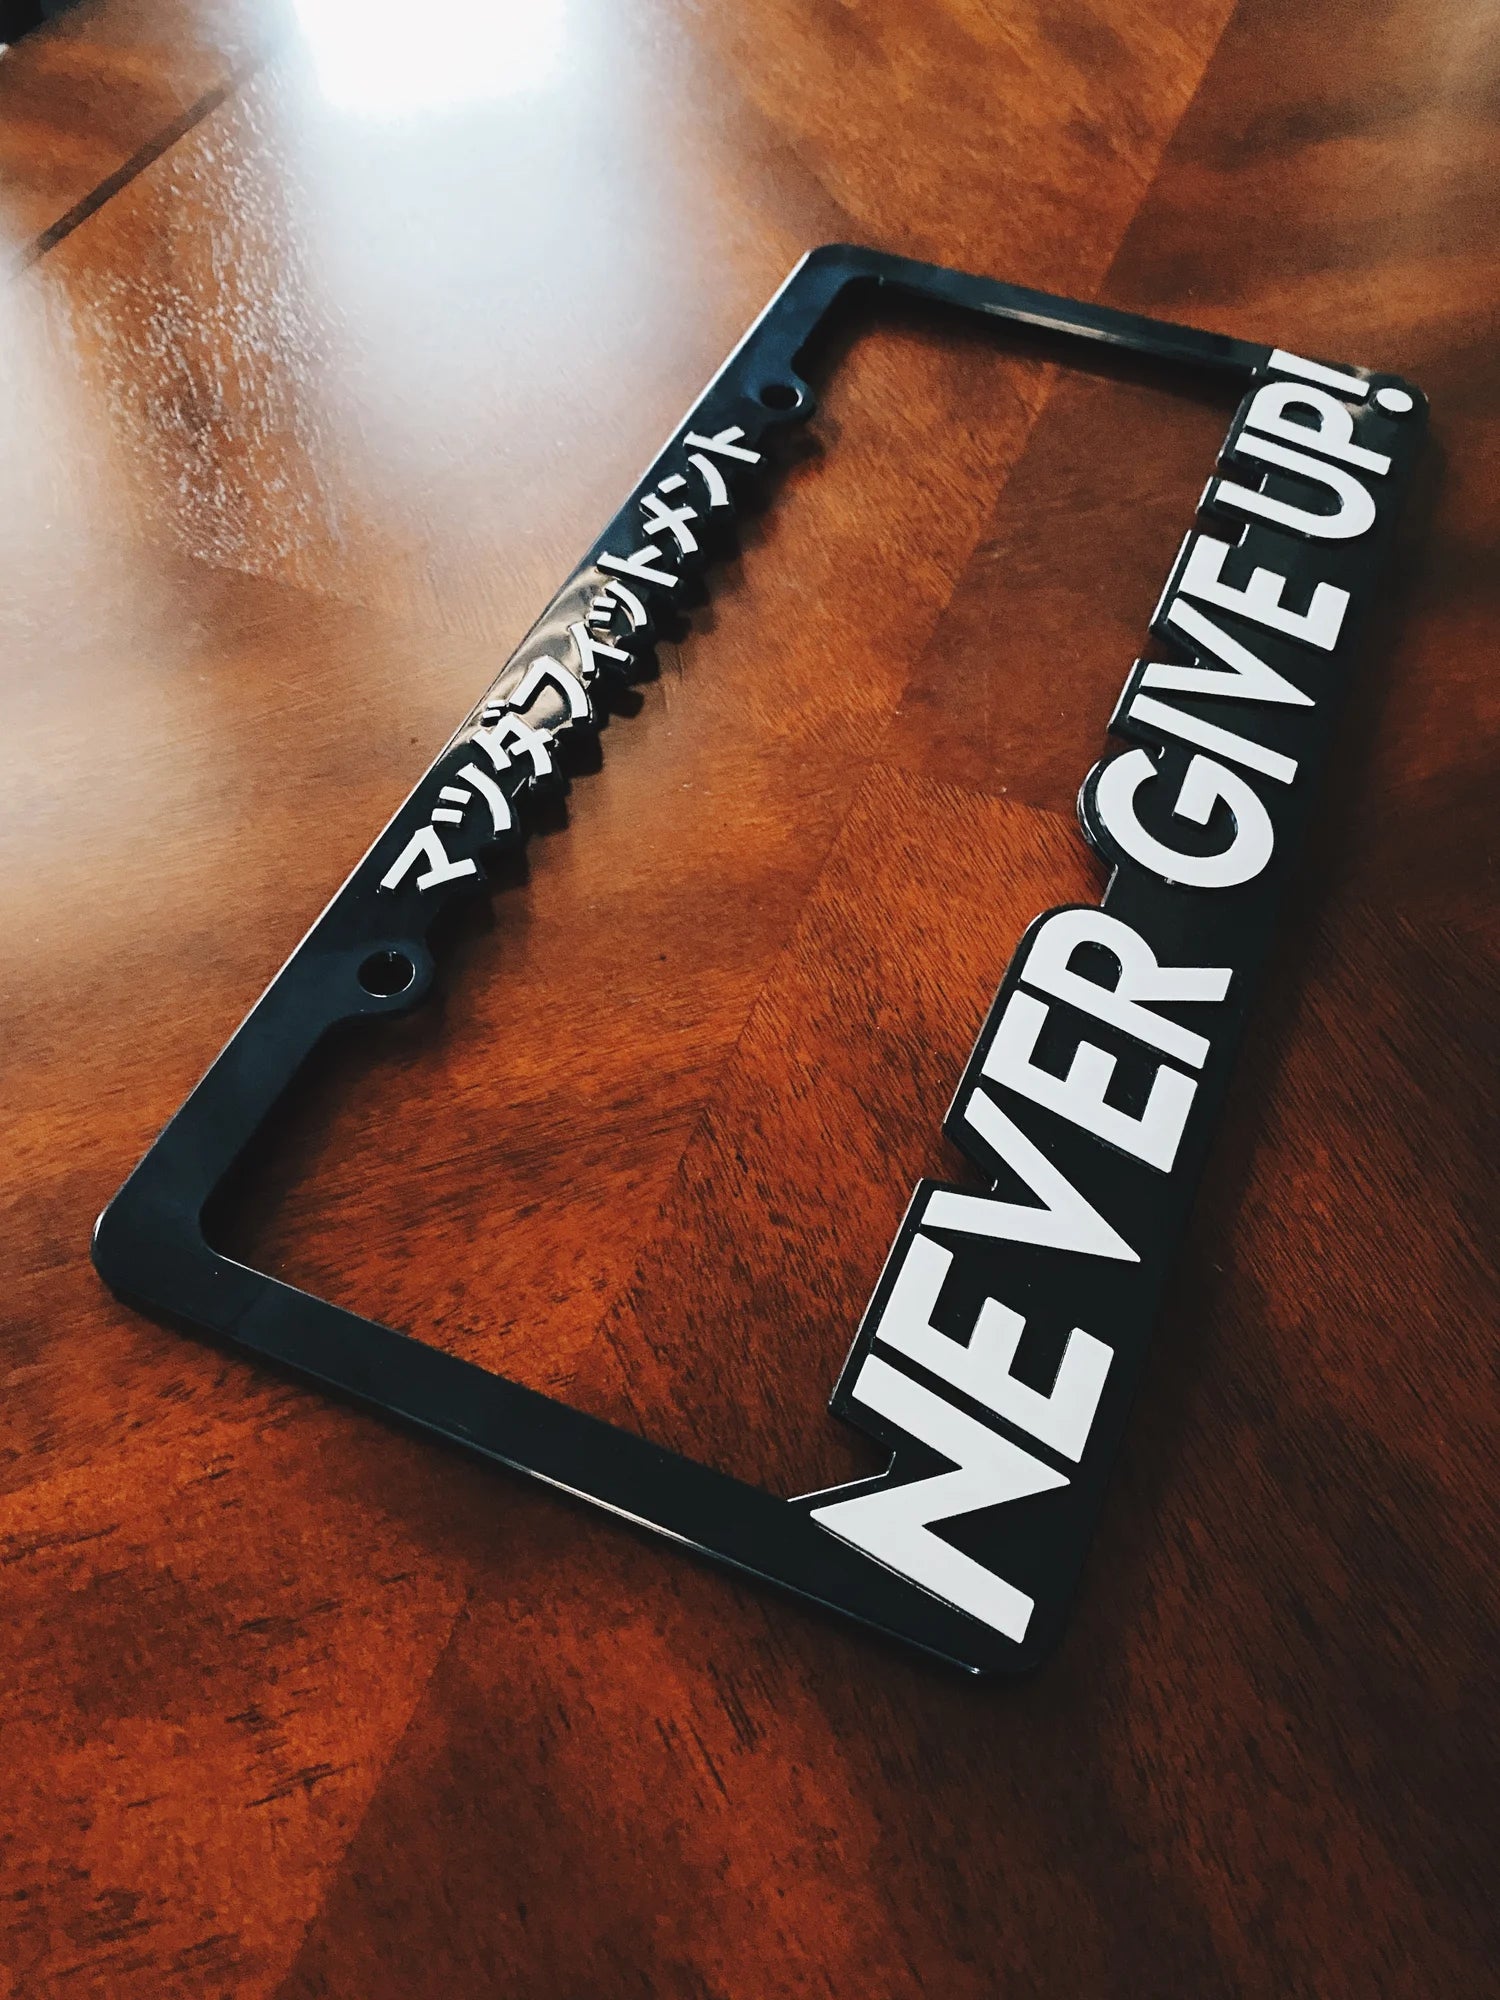 NEVER GIVE UP! - LICENSE PLATE FRAME